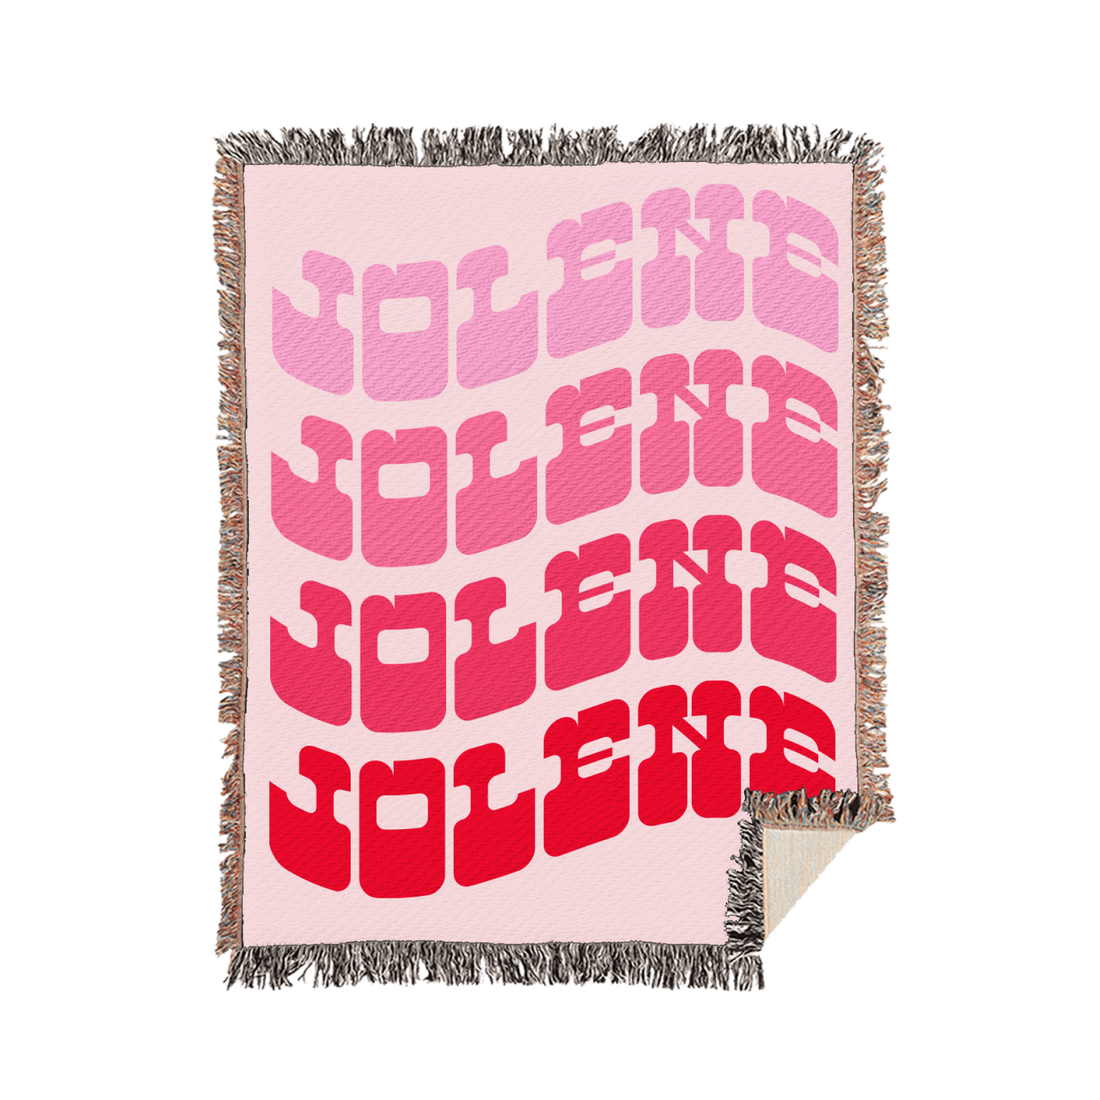 Dolly Parton Official Merchandise. 54” x 60” 90% polyester, 10% cotton tapestry weave throw blanket with the song title Jolene repeated in different colors of pink.